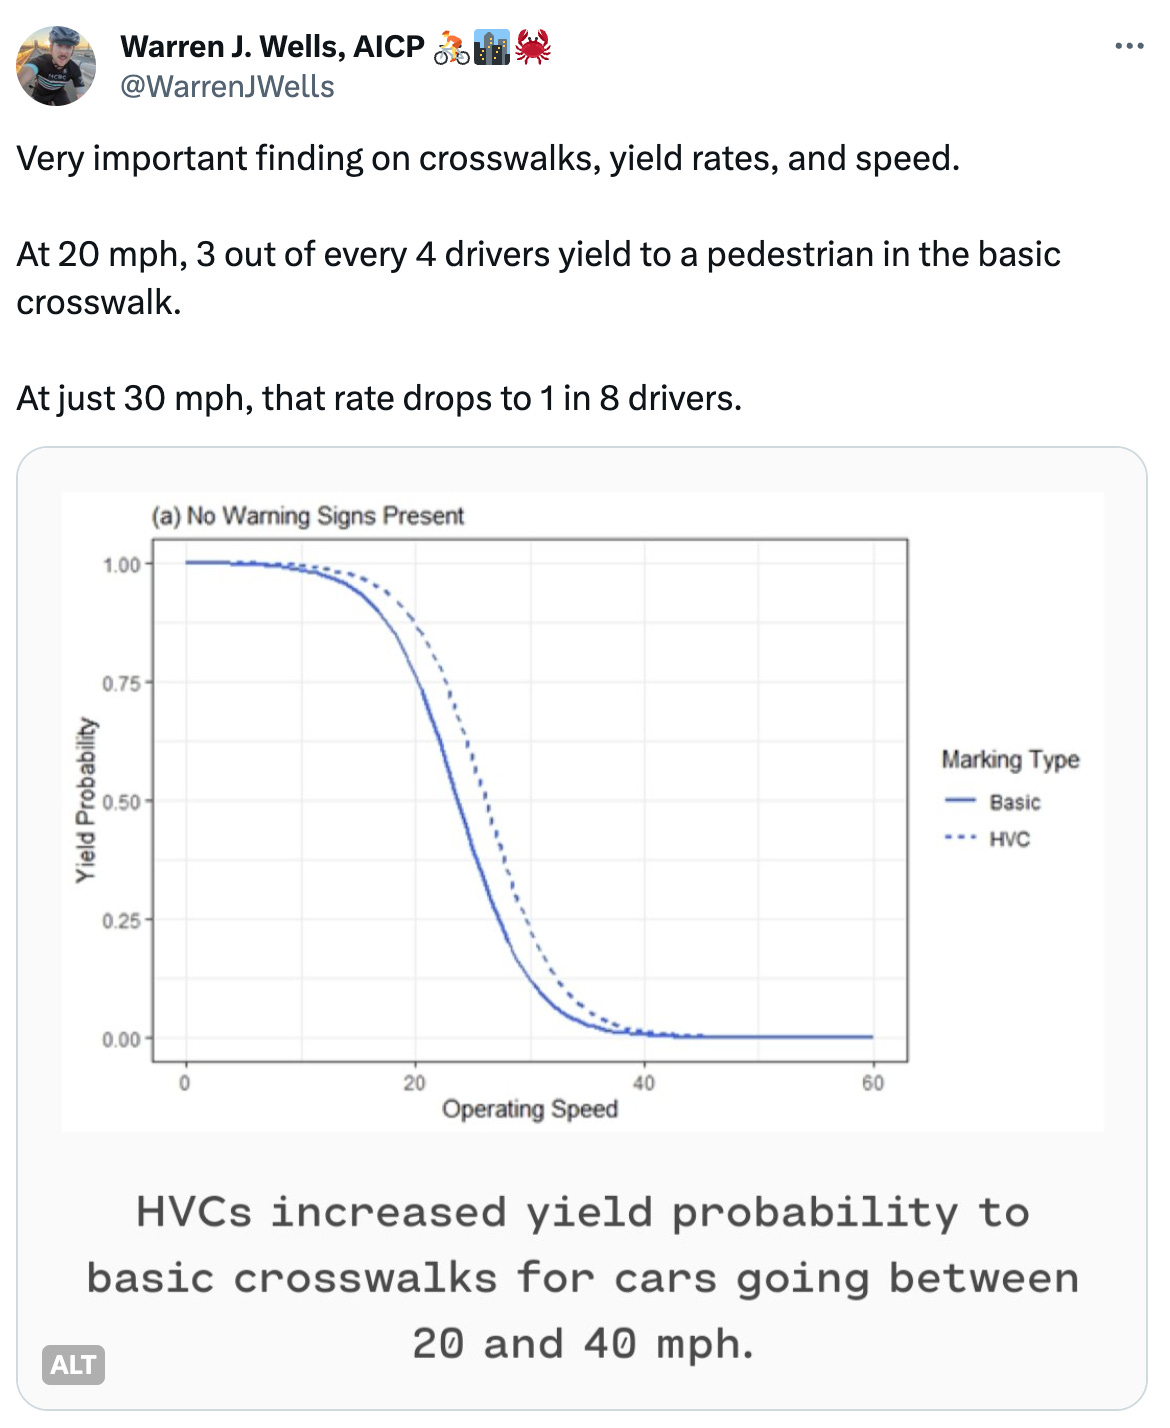  See new posts Conversation Warren J. Wells, AICP 🚴🏙️🦀 @WarrenJWells Very important finding on crosswalks, yield rates, and speed.  At 20 mph, 3 out of every 4 drivers yield to a pedestrian in the basic crosswalk.  At just 30 mph, that rate drops to 1 in 8 drivers.